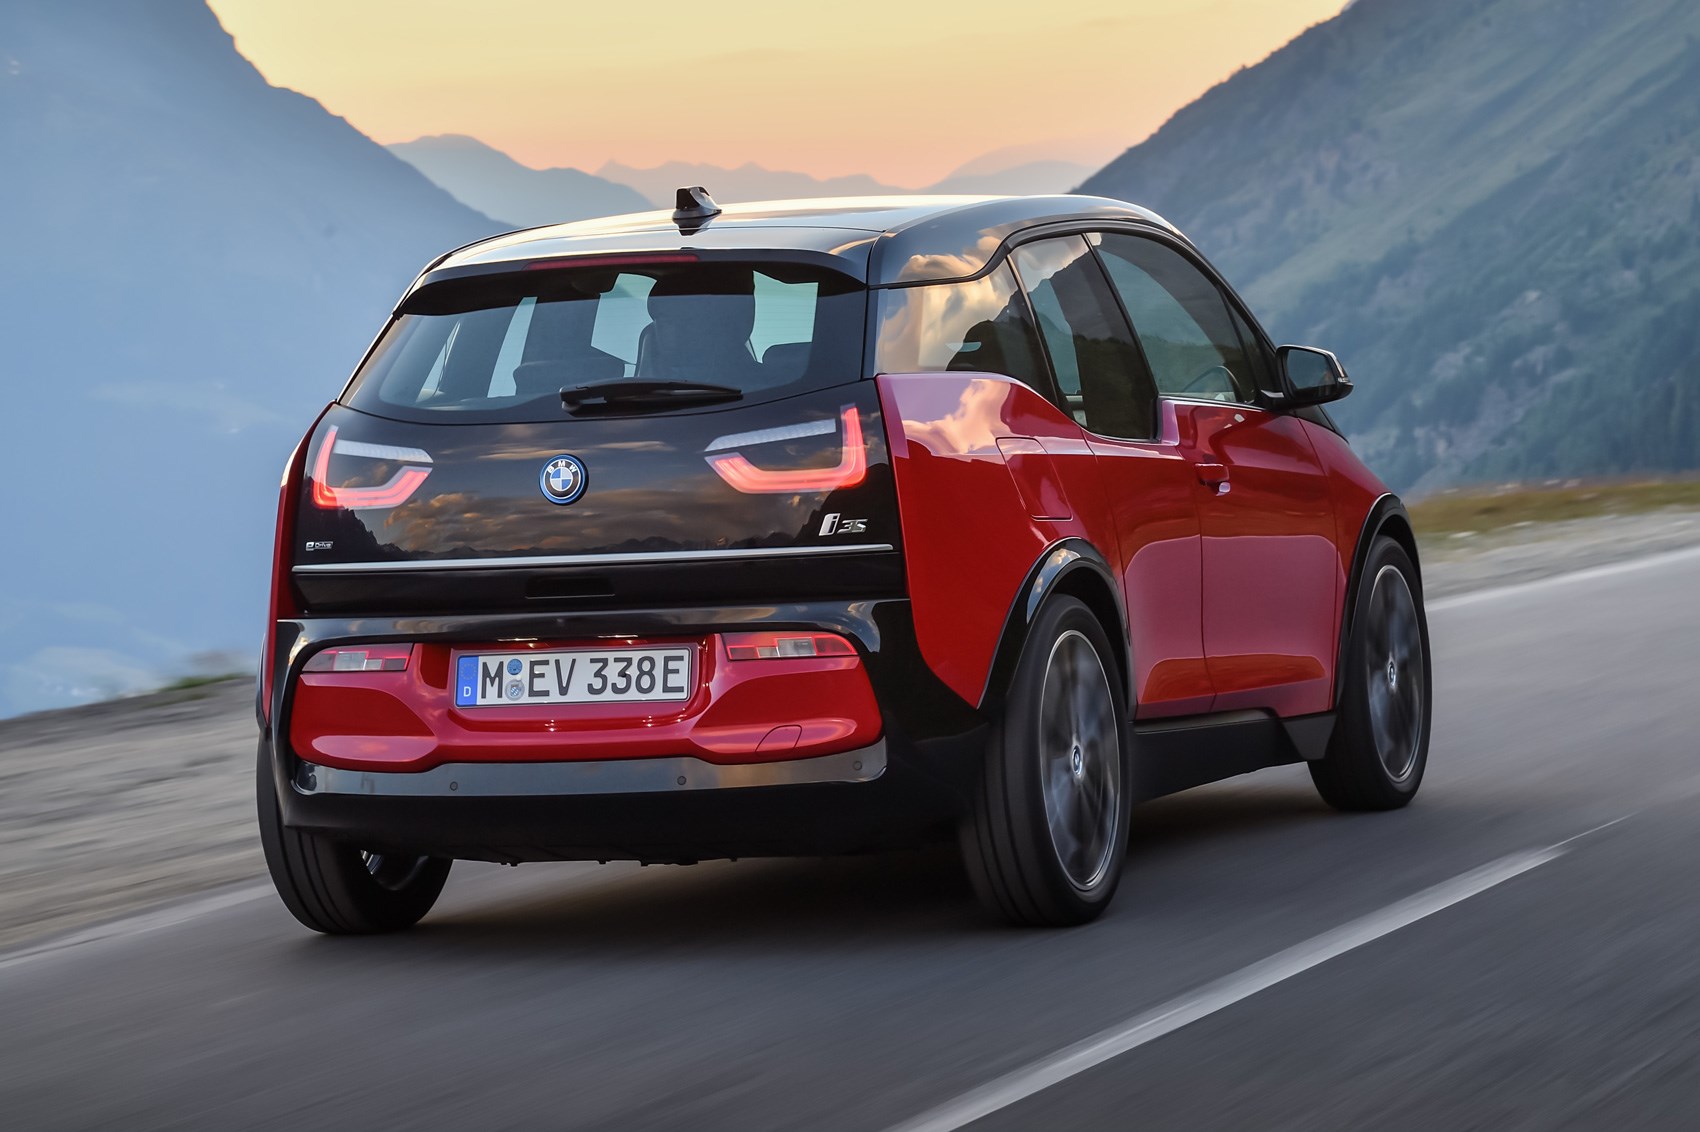 2018 BMW i3 unveiled with small design refresh and new sport